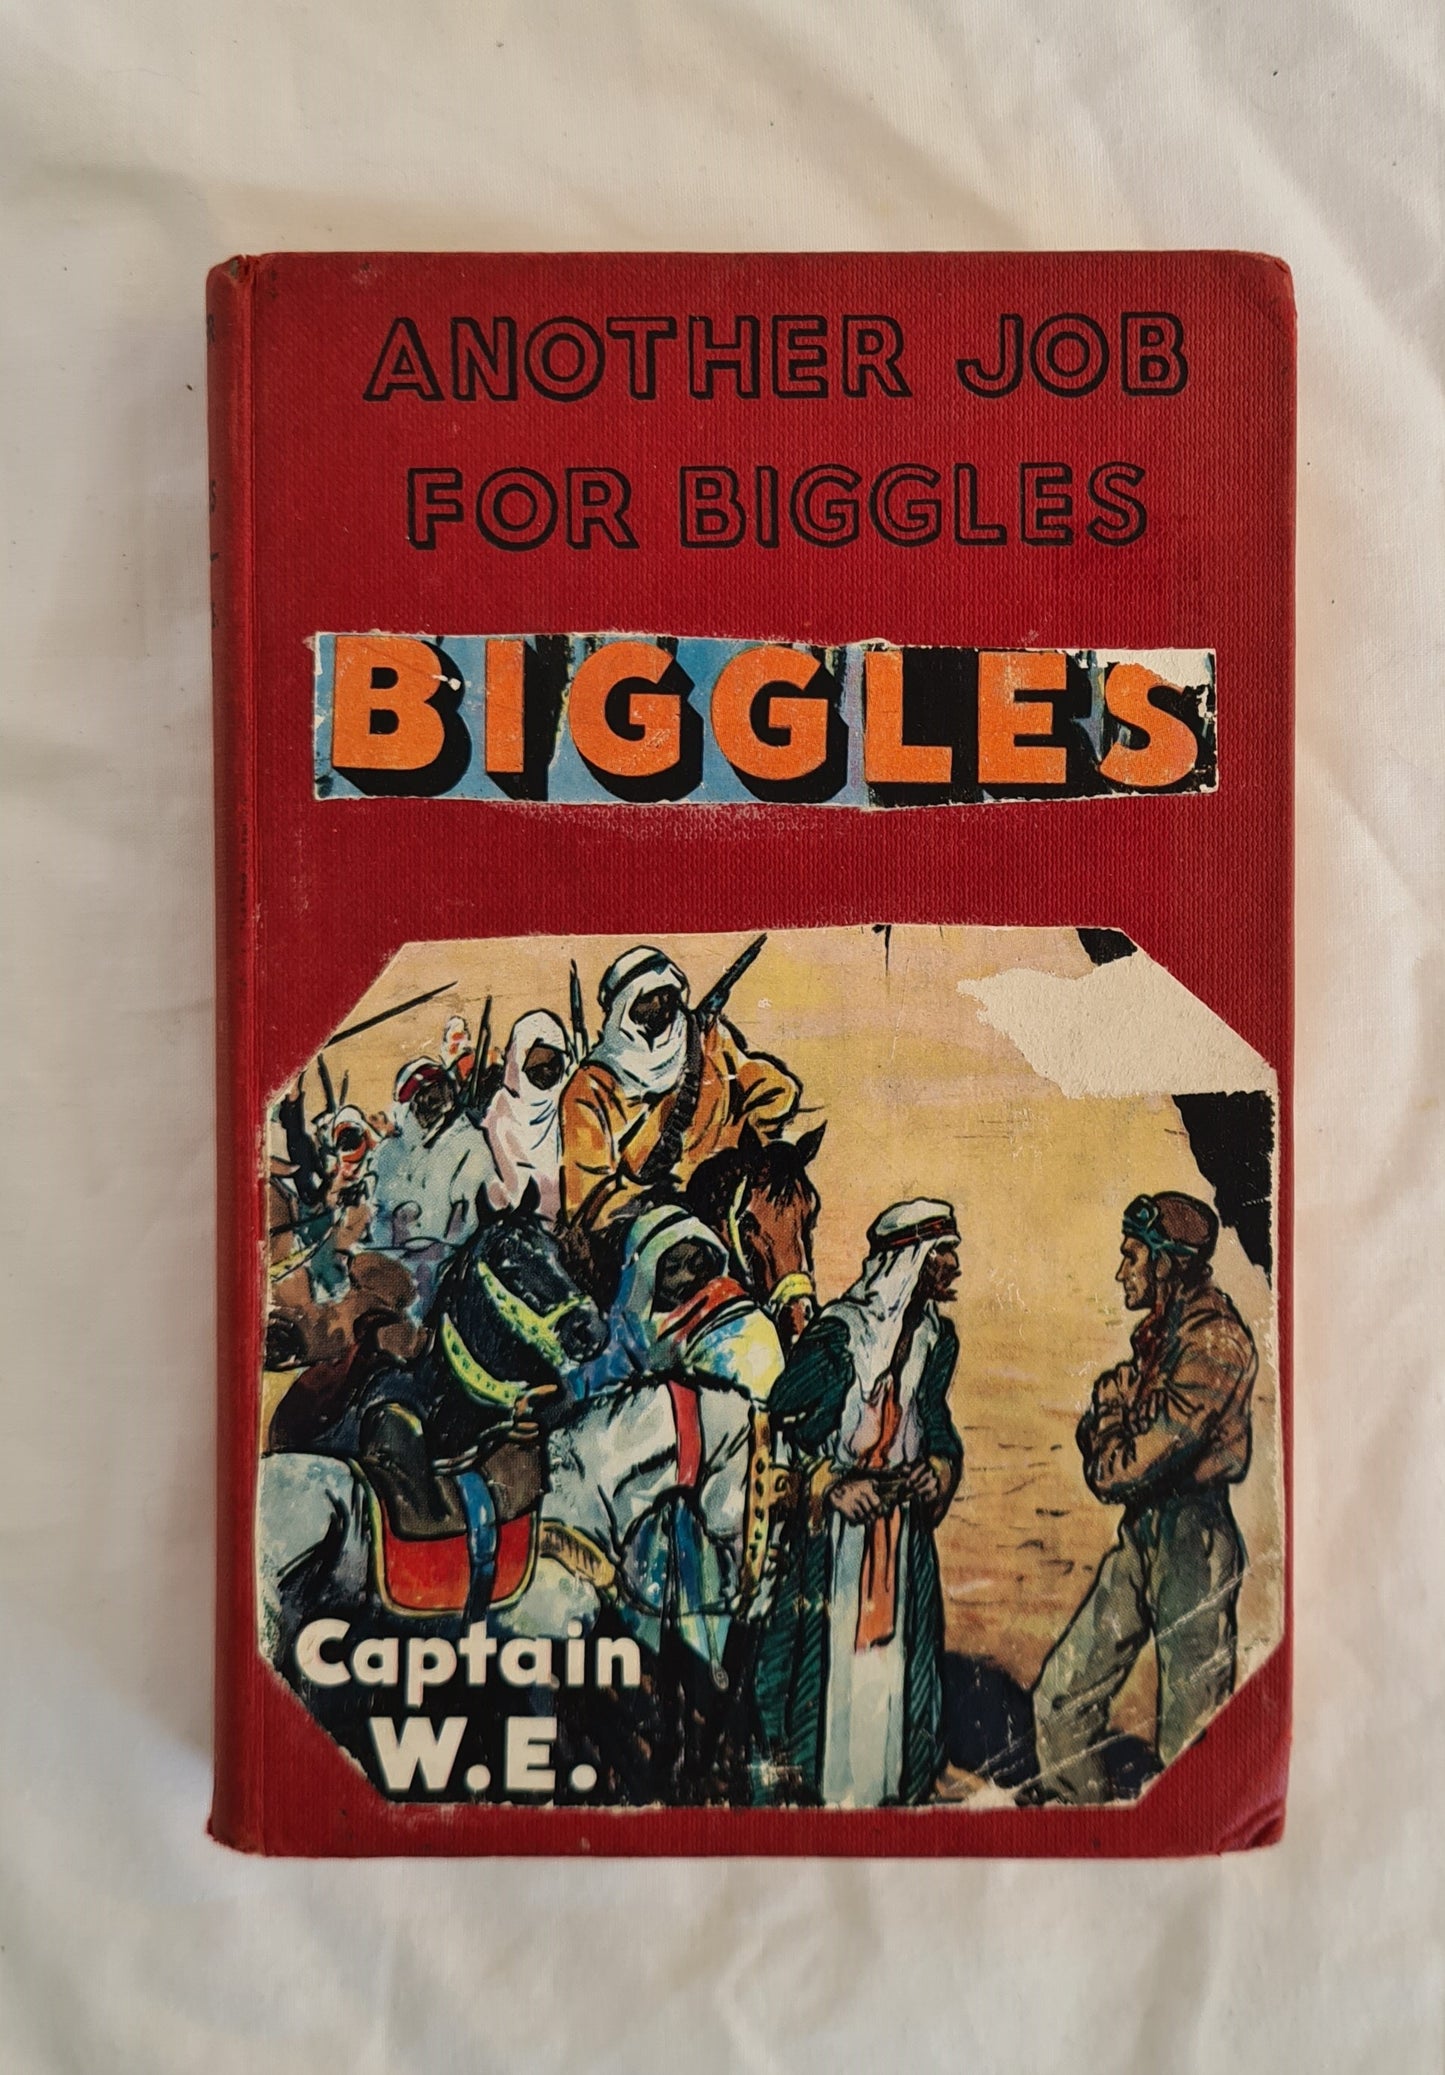 Another Job for Biggles  by Captain W. E. Johns  illustrated by Stead